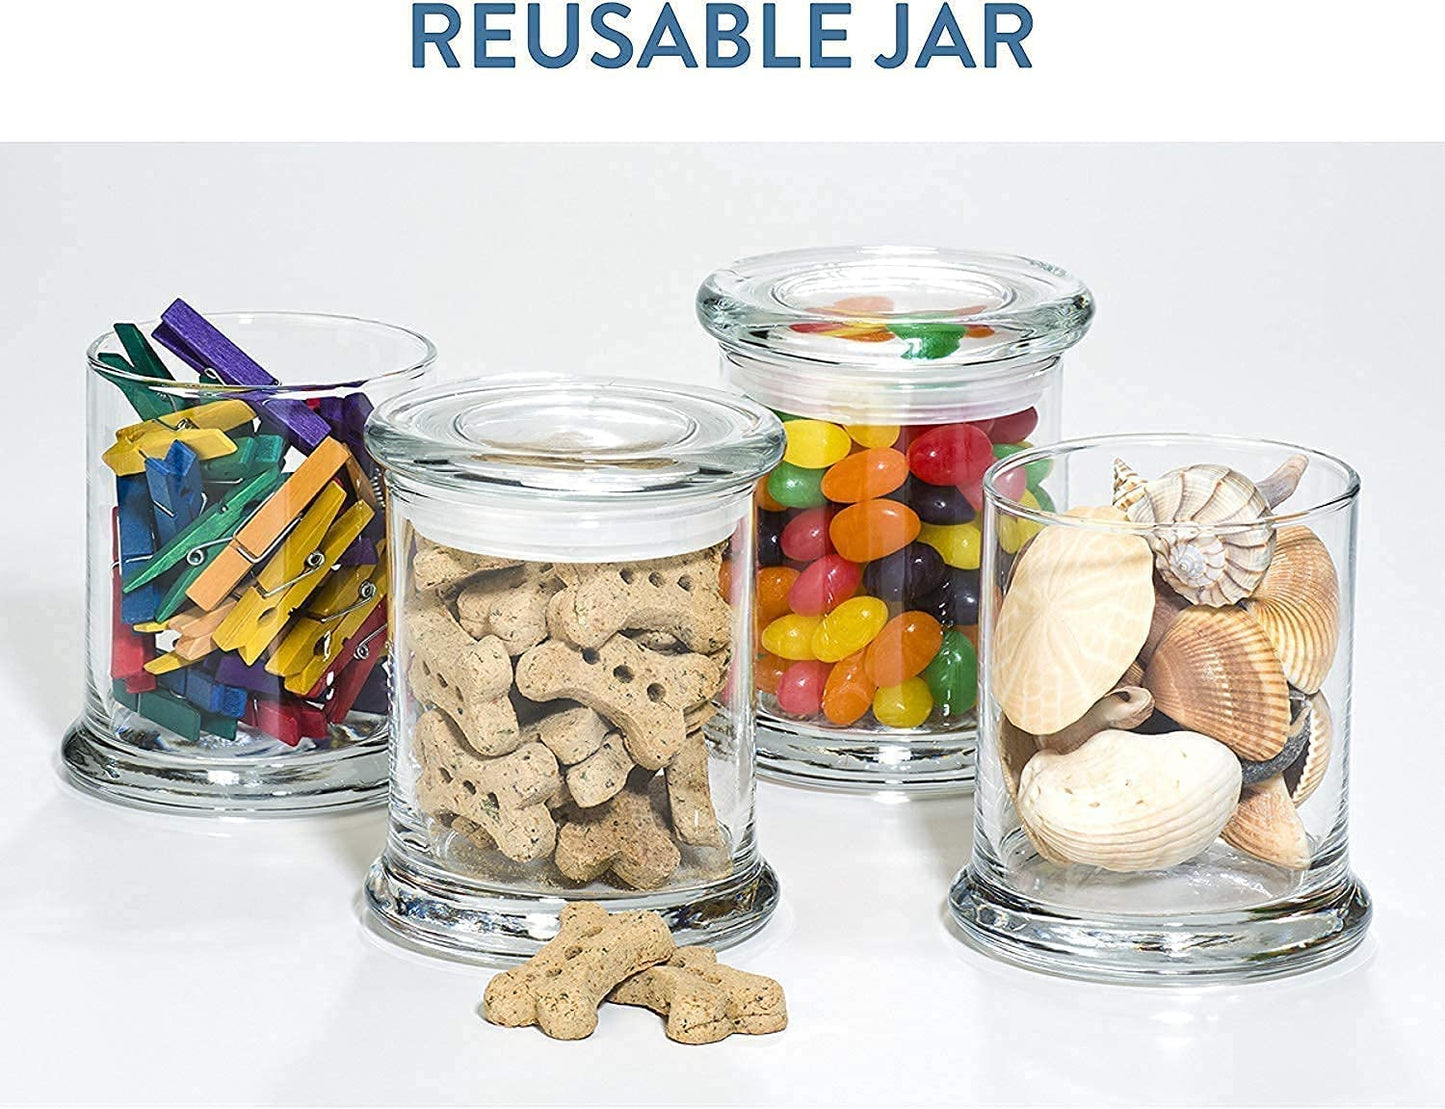 4 candle jars filled with various household items to show the possible uses of the reusable jar 